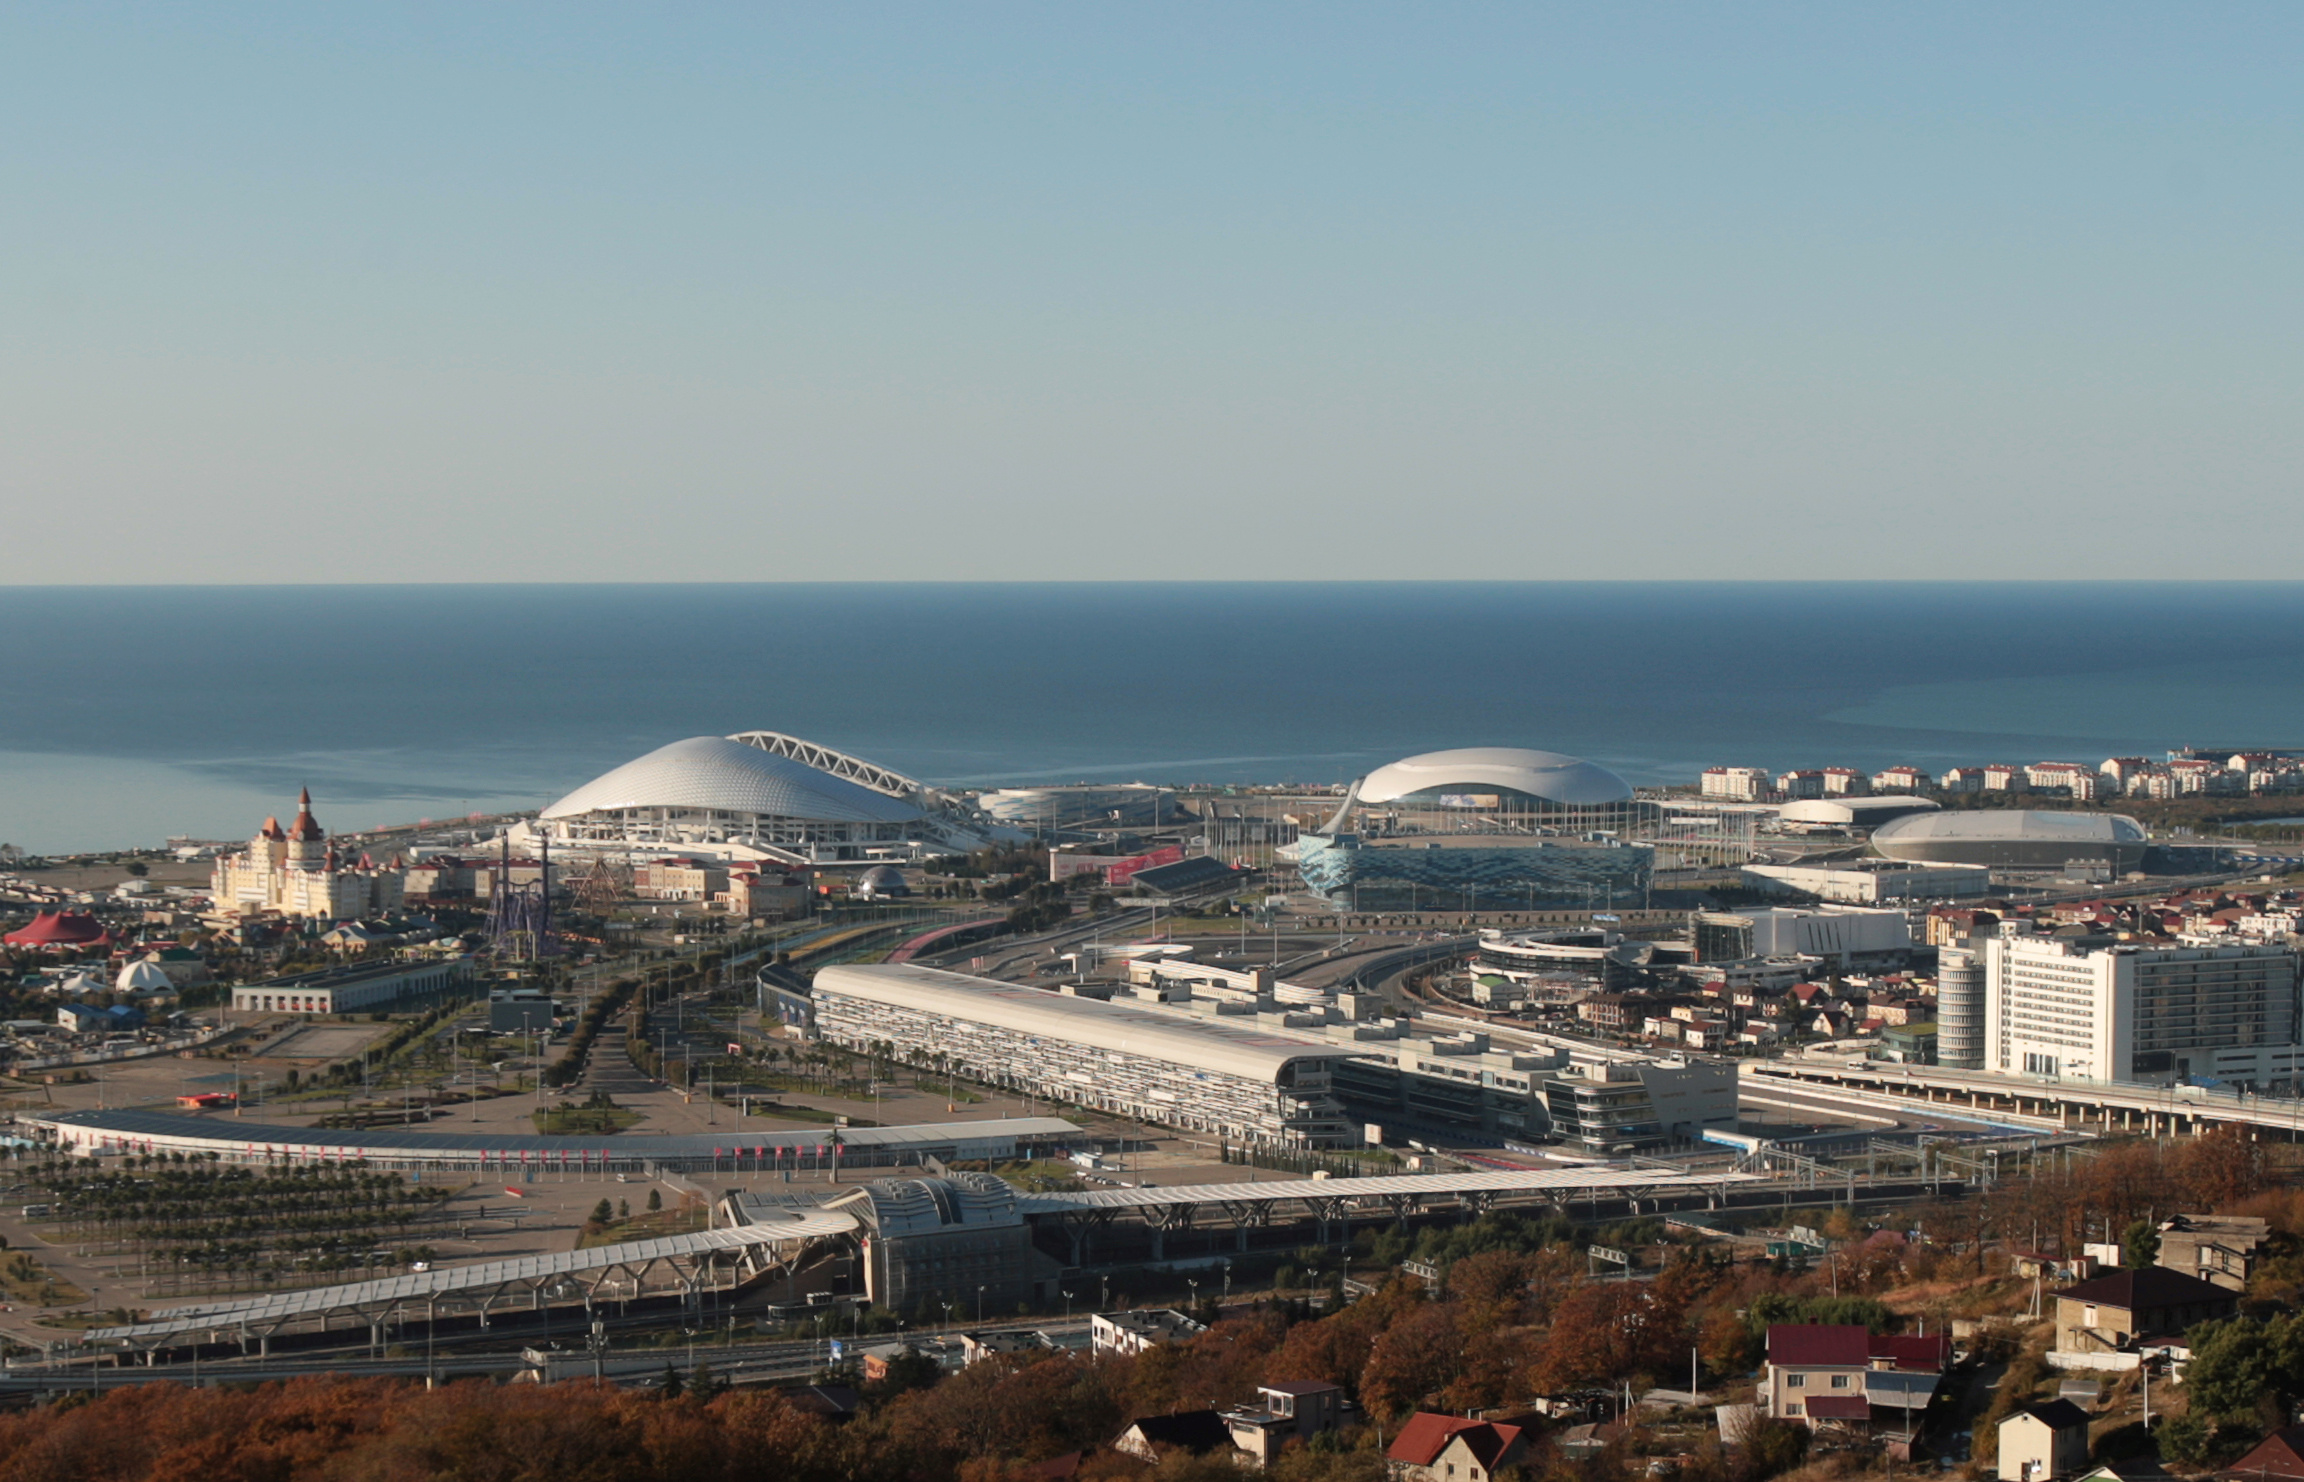 General view of the Olympic Park in Sochi